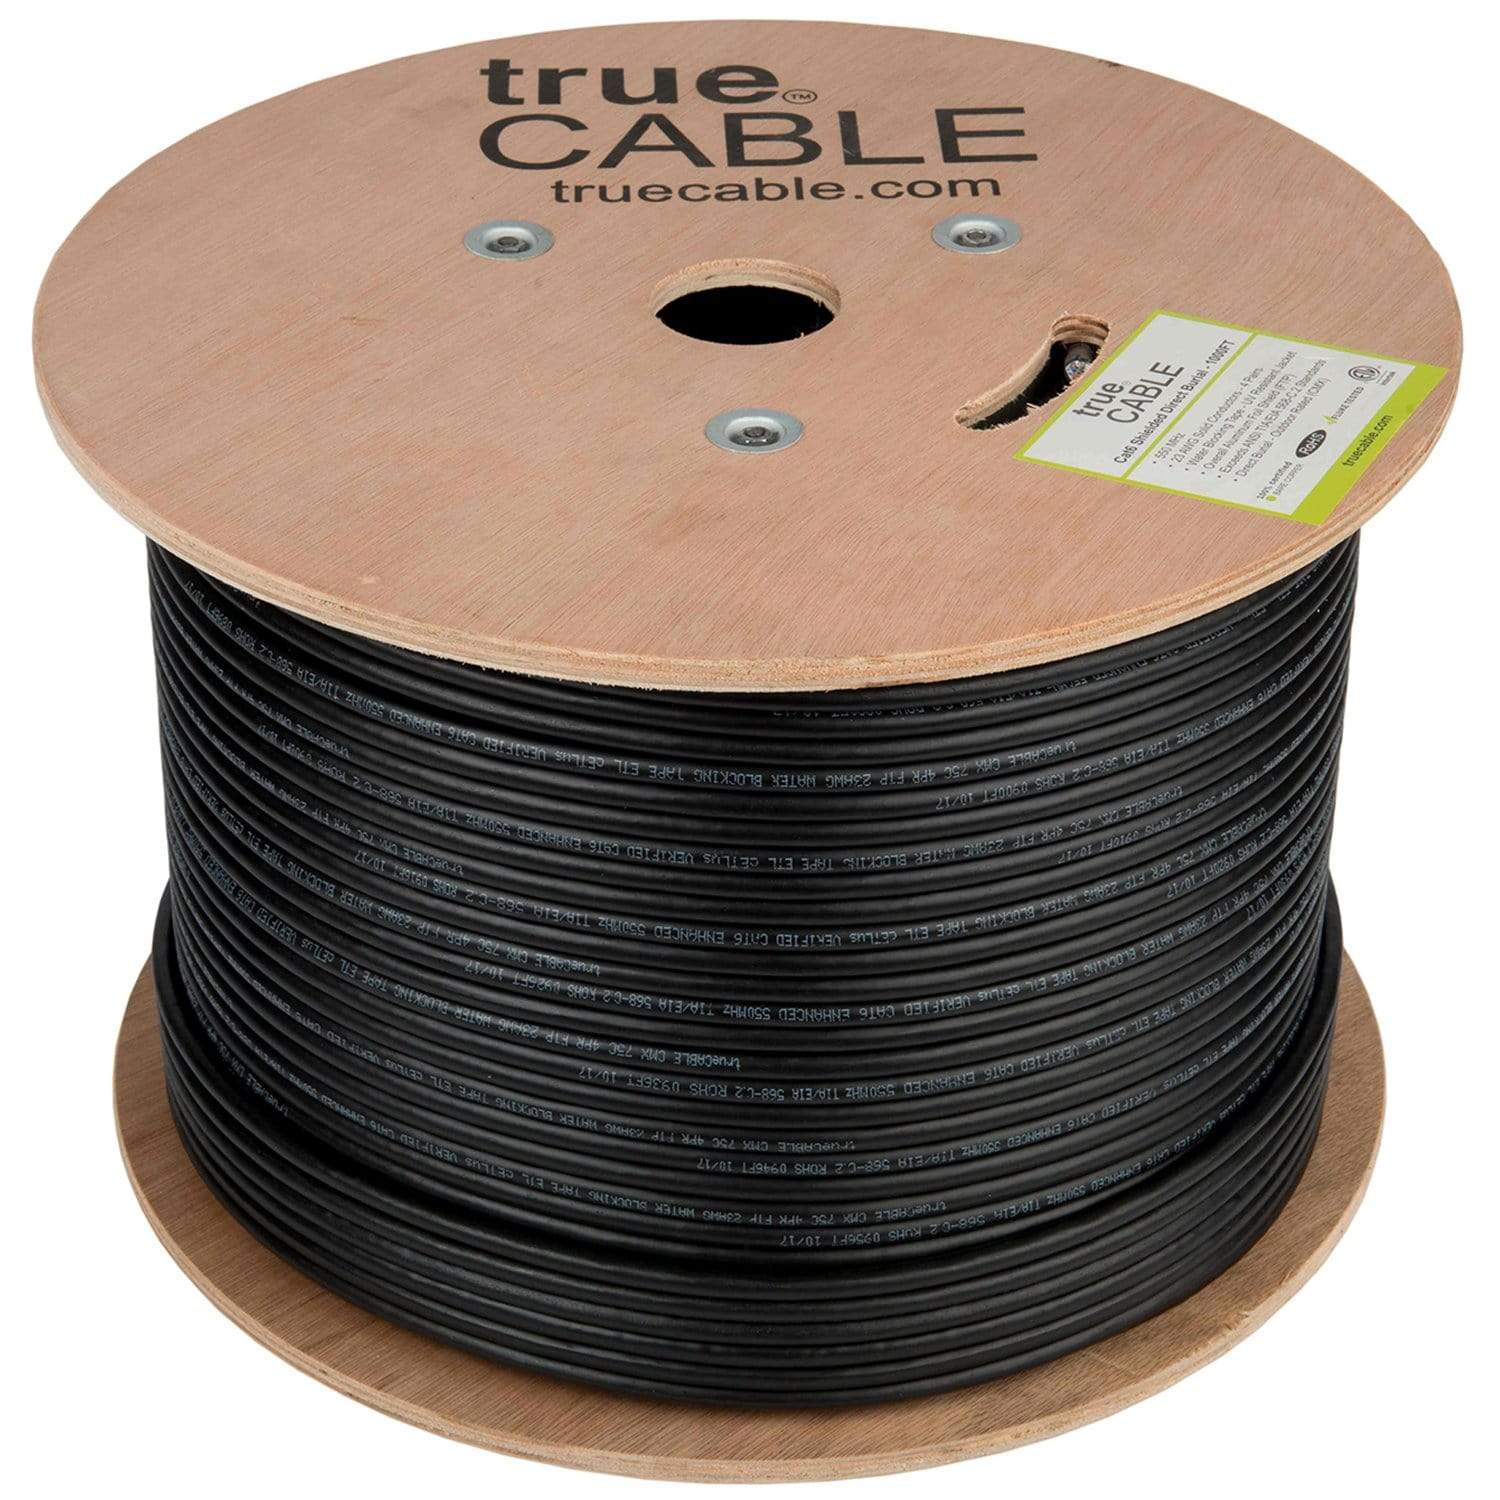 trueCABLE Cat6 Direct Burial, Shielded FTP, 500ft, Waterproof, Outdoor Rated CMX, Black, 23AWG Solid Bare Copper, 550Mhz, ETL Listed, Bulk Ethernet